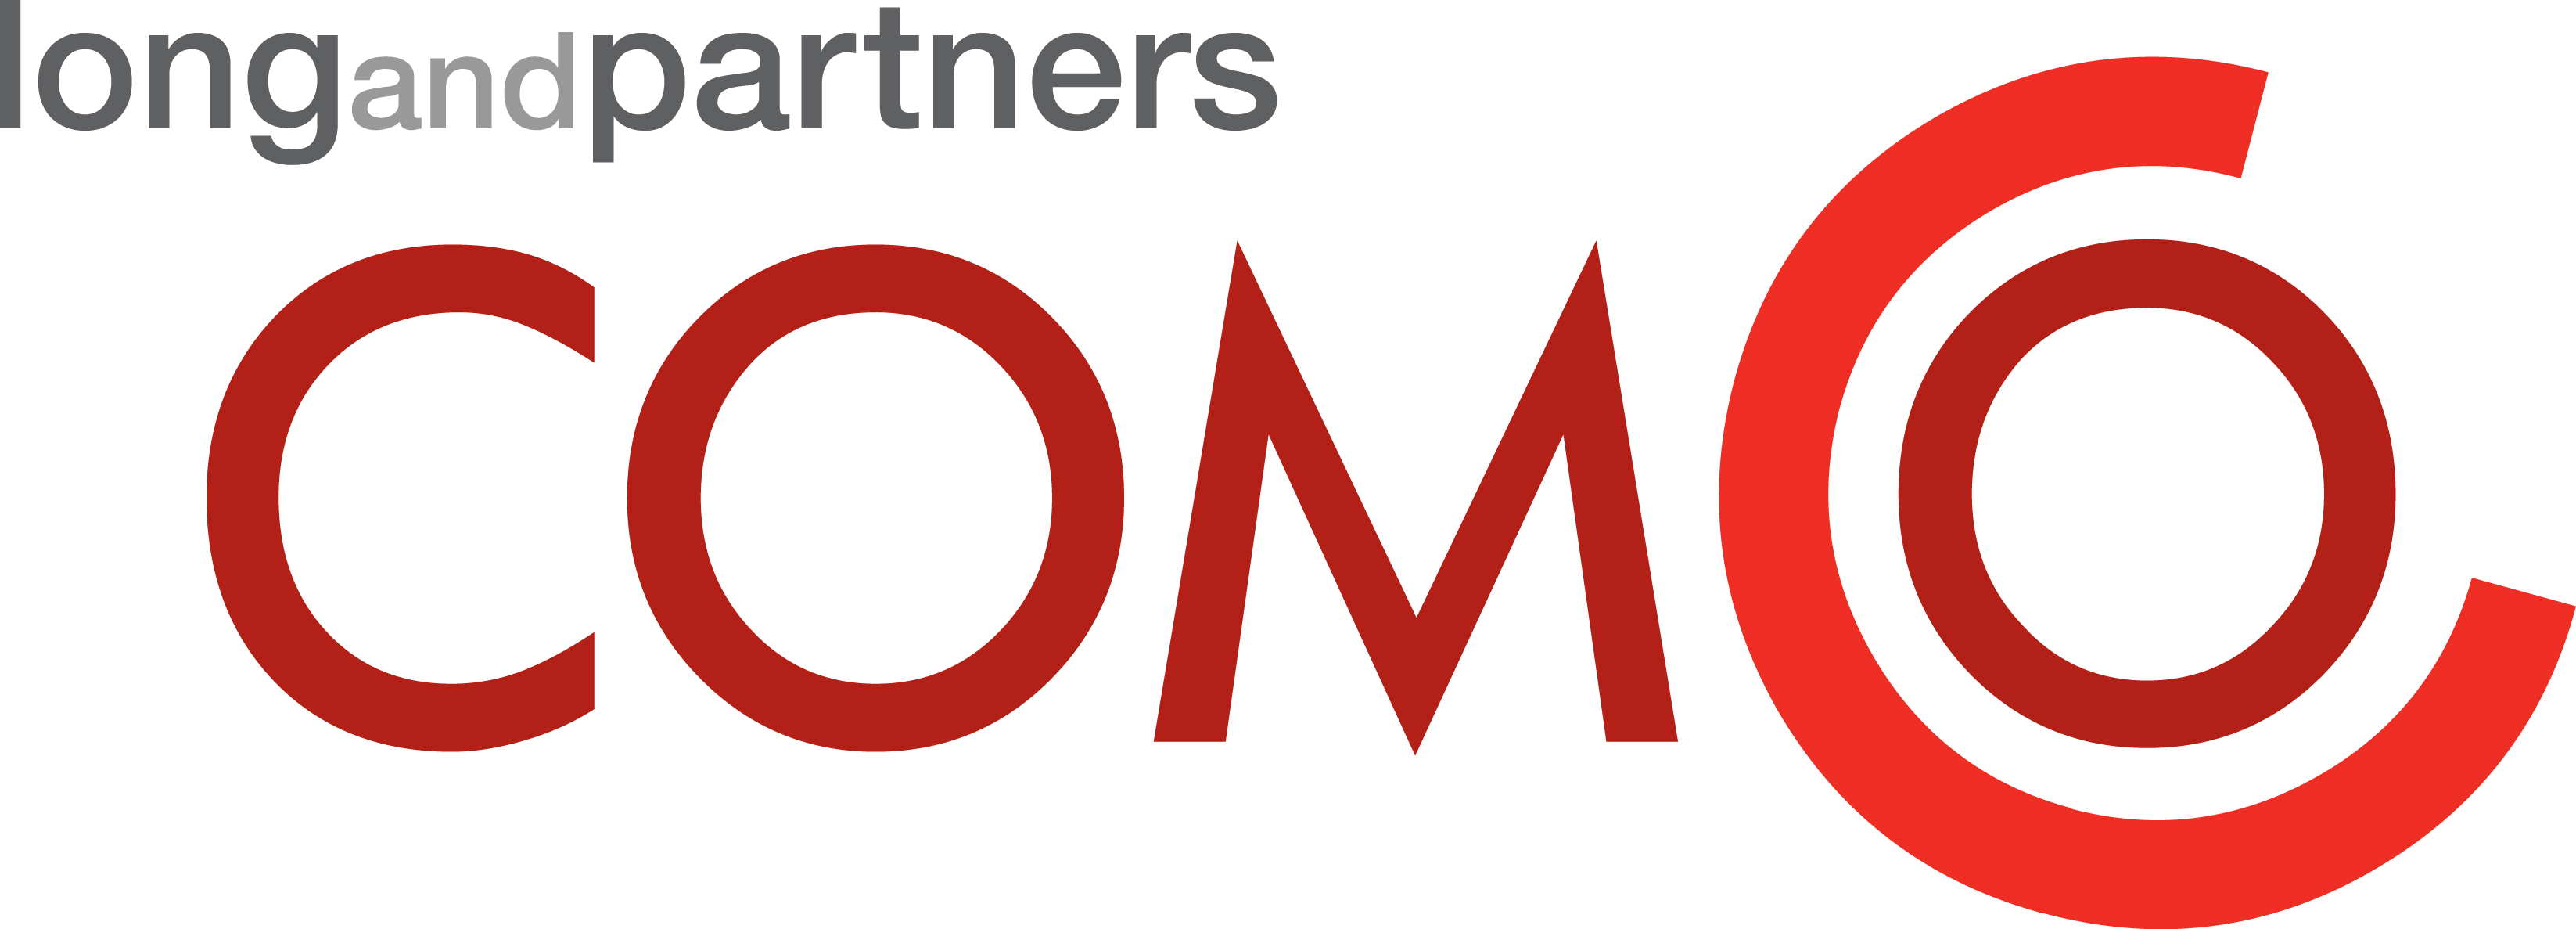 Long and Partners Commissioning Consultancy (COMCO)